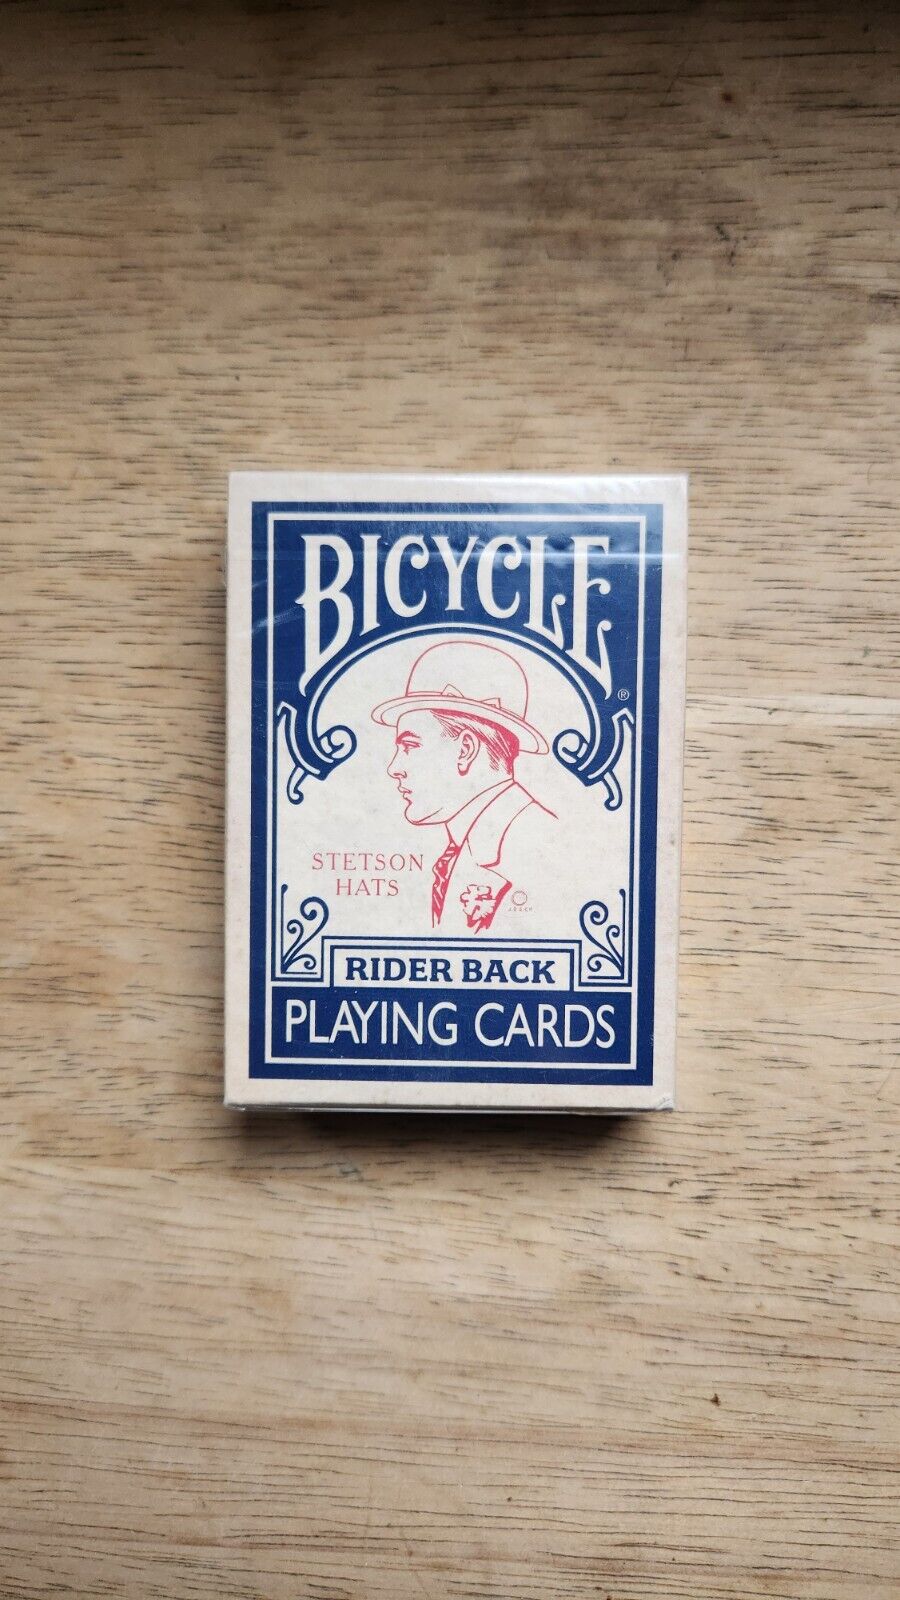 Bicycle Stetson Hats Playing Cards Limited Collaboration Deck - SEALED